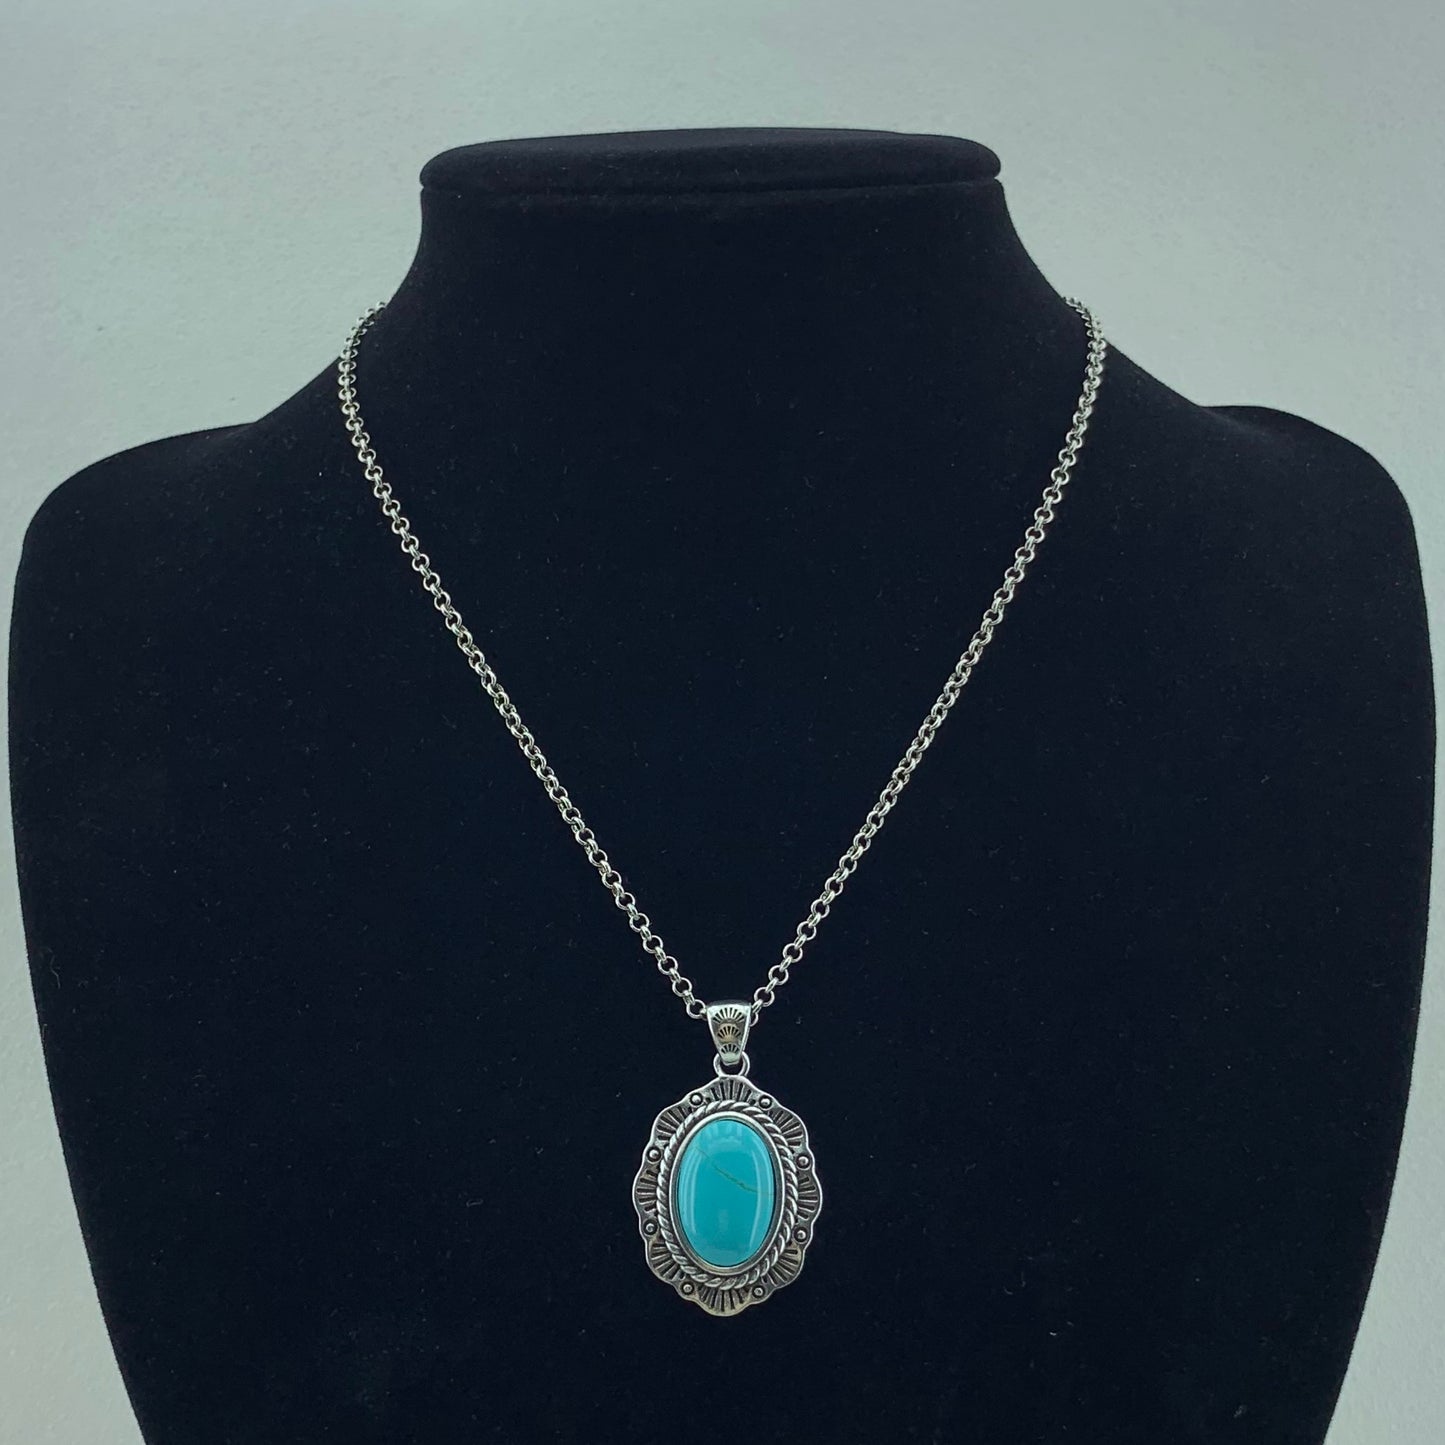 Women's Fashion Turquoise Western Antique Vintage Jewelry Sets